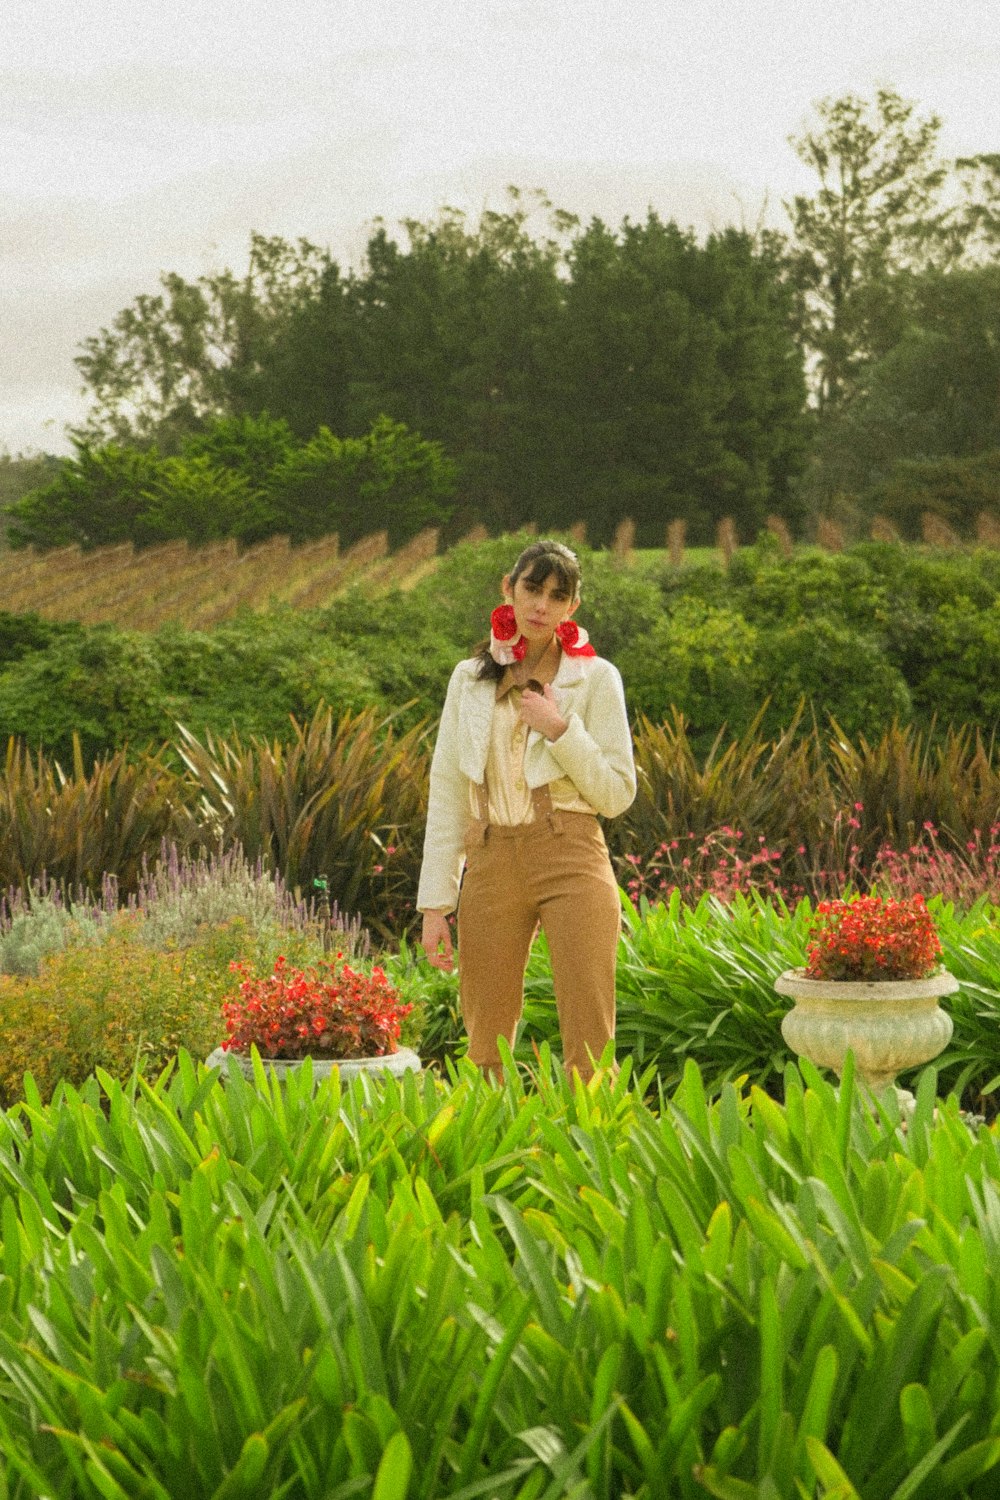 a woman standing in a garden holding a red flower